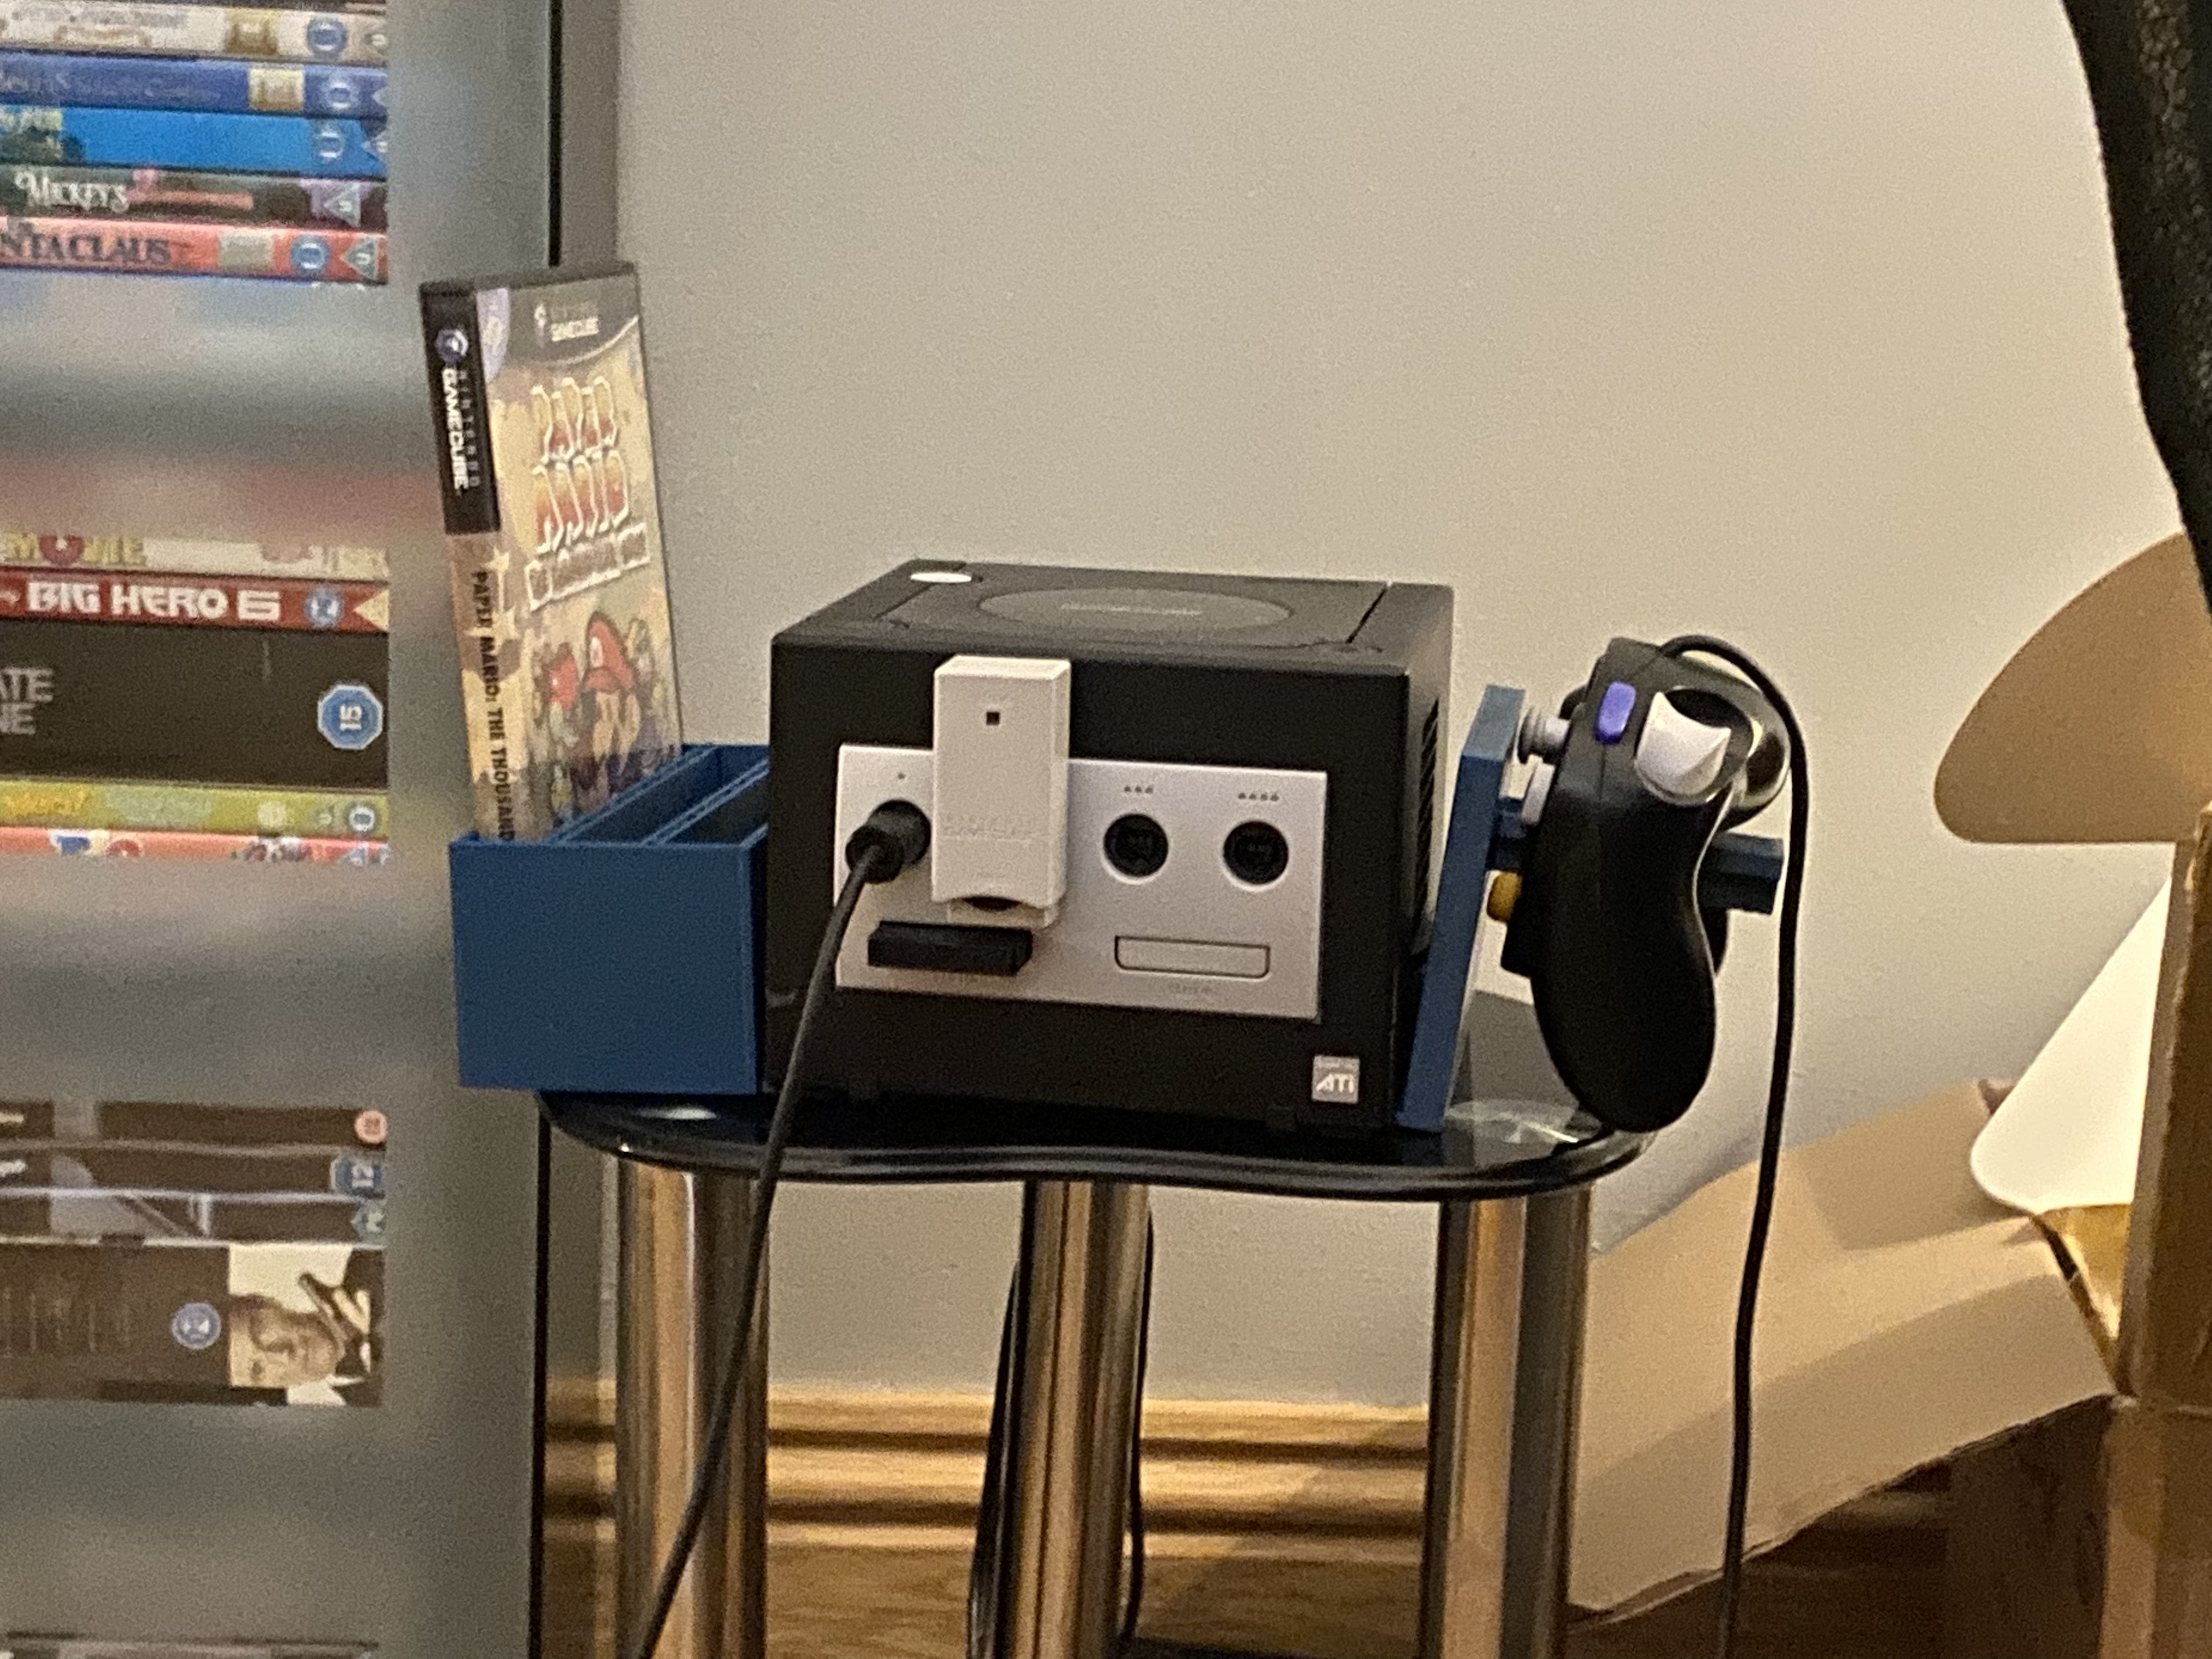 Gamecube all in one stand